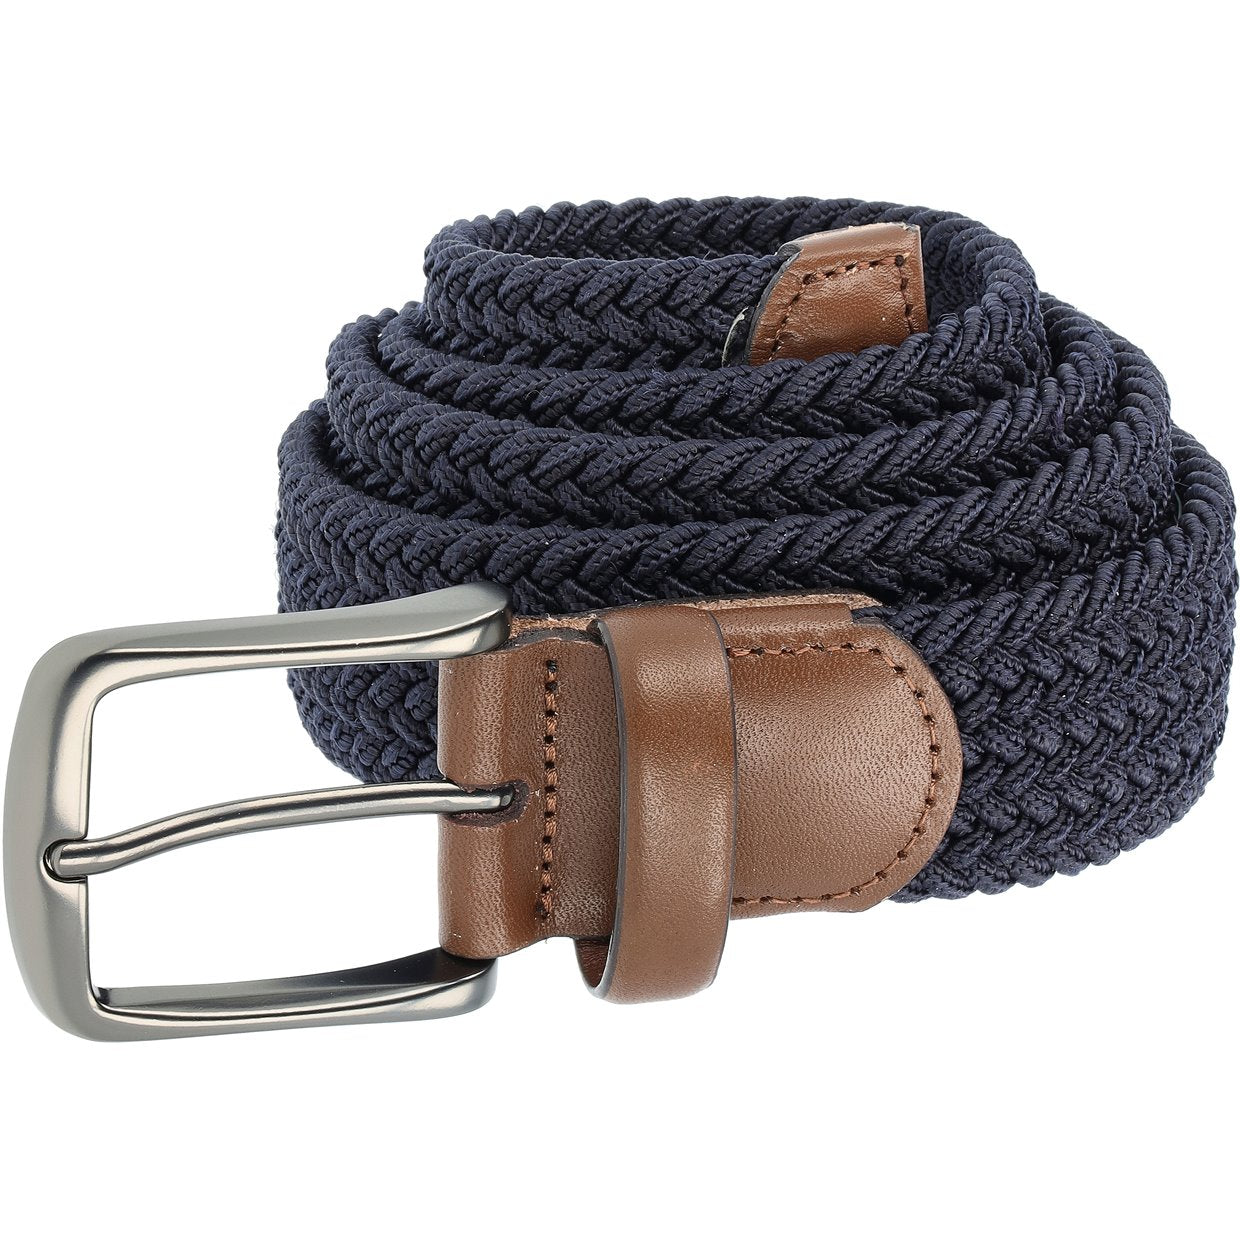 These 7 braided belts are the perfect finishing touch for every outfit